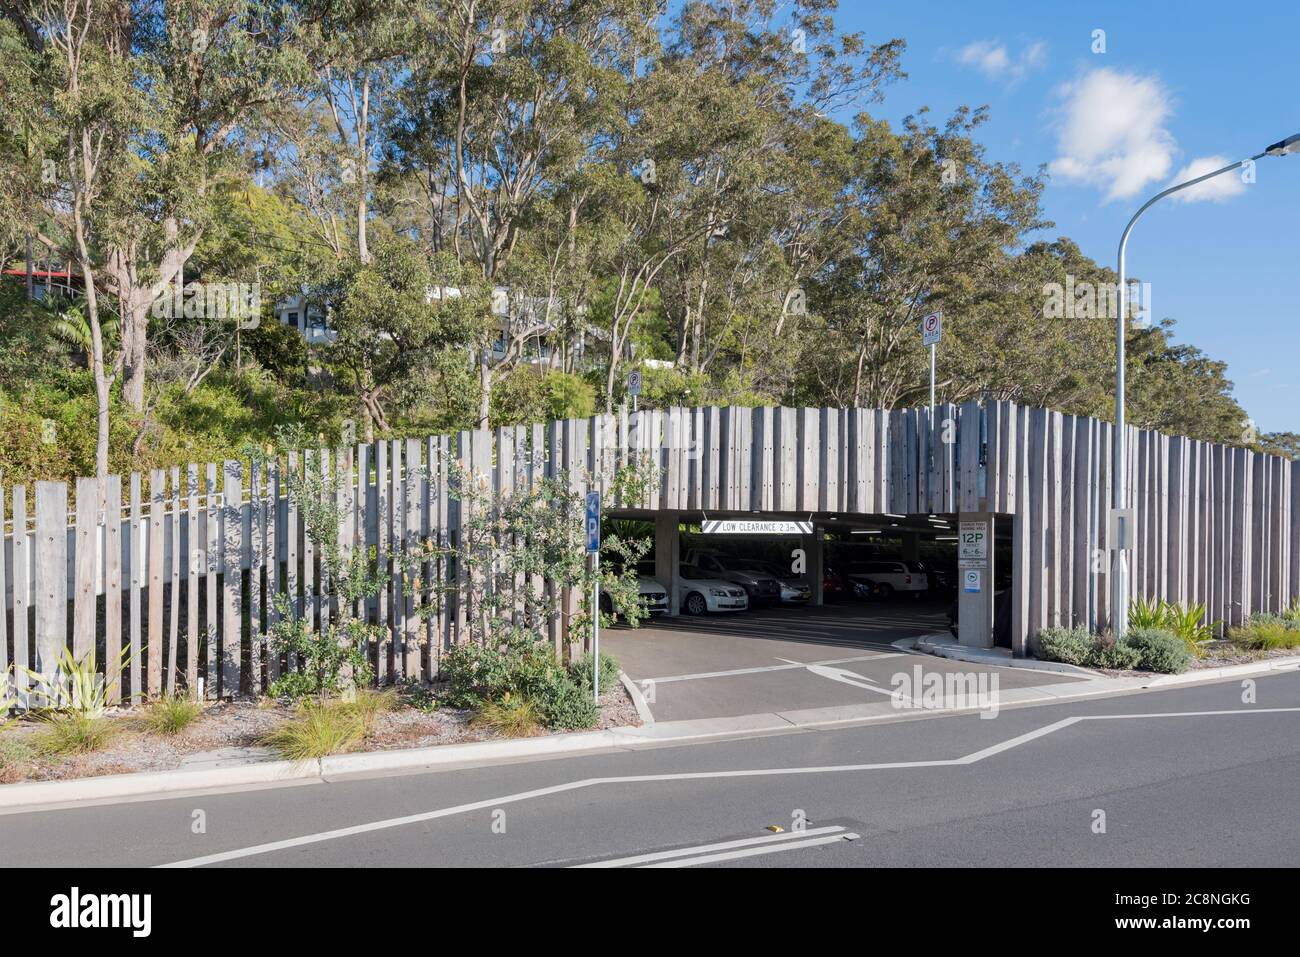 The Church Point, Sydney car park designed and built in 2018 by Ward Group uses eucalyptus vertical timber to blend in naturally into its surroundings Stock Photo